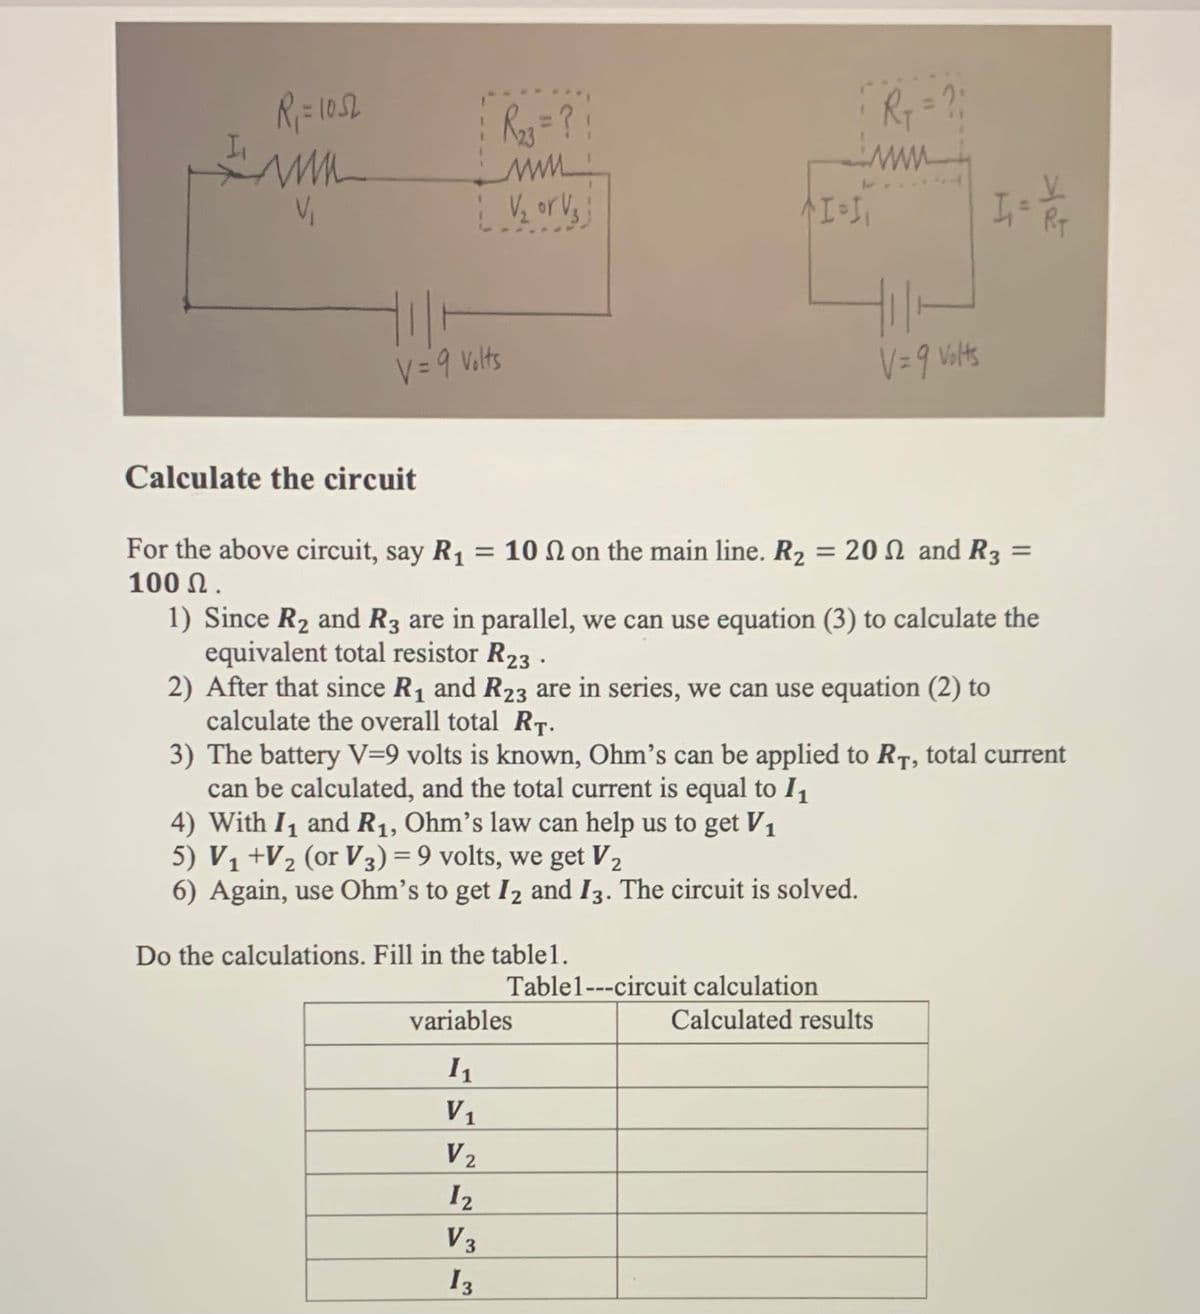 %3D
Ry =?
www
V = 9 Volts
V= 9 Valts
Calculate the circuit
For the above circuit, say R1 = 10 N on the main line. R2 = 20 N and R3 =
100 Ω.
1) Since R2 and R3 are in parallel, we can use equation (3) to calculate the
equivalent total resistor R23 .
2) After that since R1 and R23 are in series, we can use equation (2) to
calculate the overall total RT.
3) The battery V=9 volts is known, Ohm's can be applied to RT, total current
can be calculated, and the total current is equal to I1
4) With I, and R1, Ohm's law can help us to get V1
5) V1 +V½ (or V3) = 9 volts, we get V2
6) Again, use Ohm's to get I2 and I3. The circuit is solved.
%3D
Do the calculations. Fill in the table1.
Table1---circuit calculation
variables
Calculated results
V1
V2
I2
V3
I3
